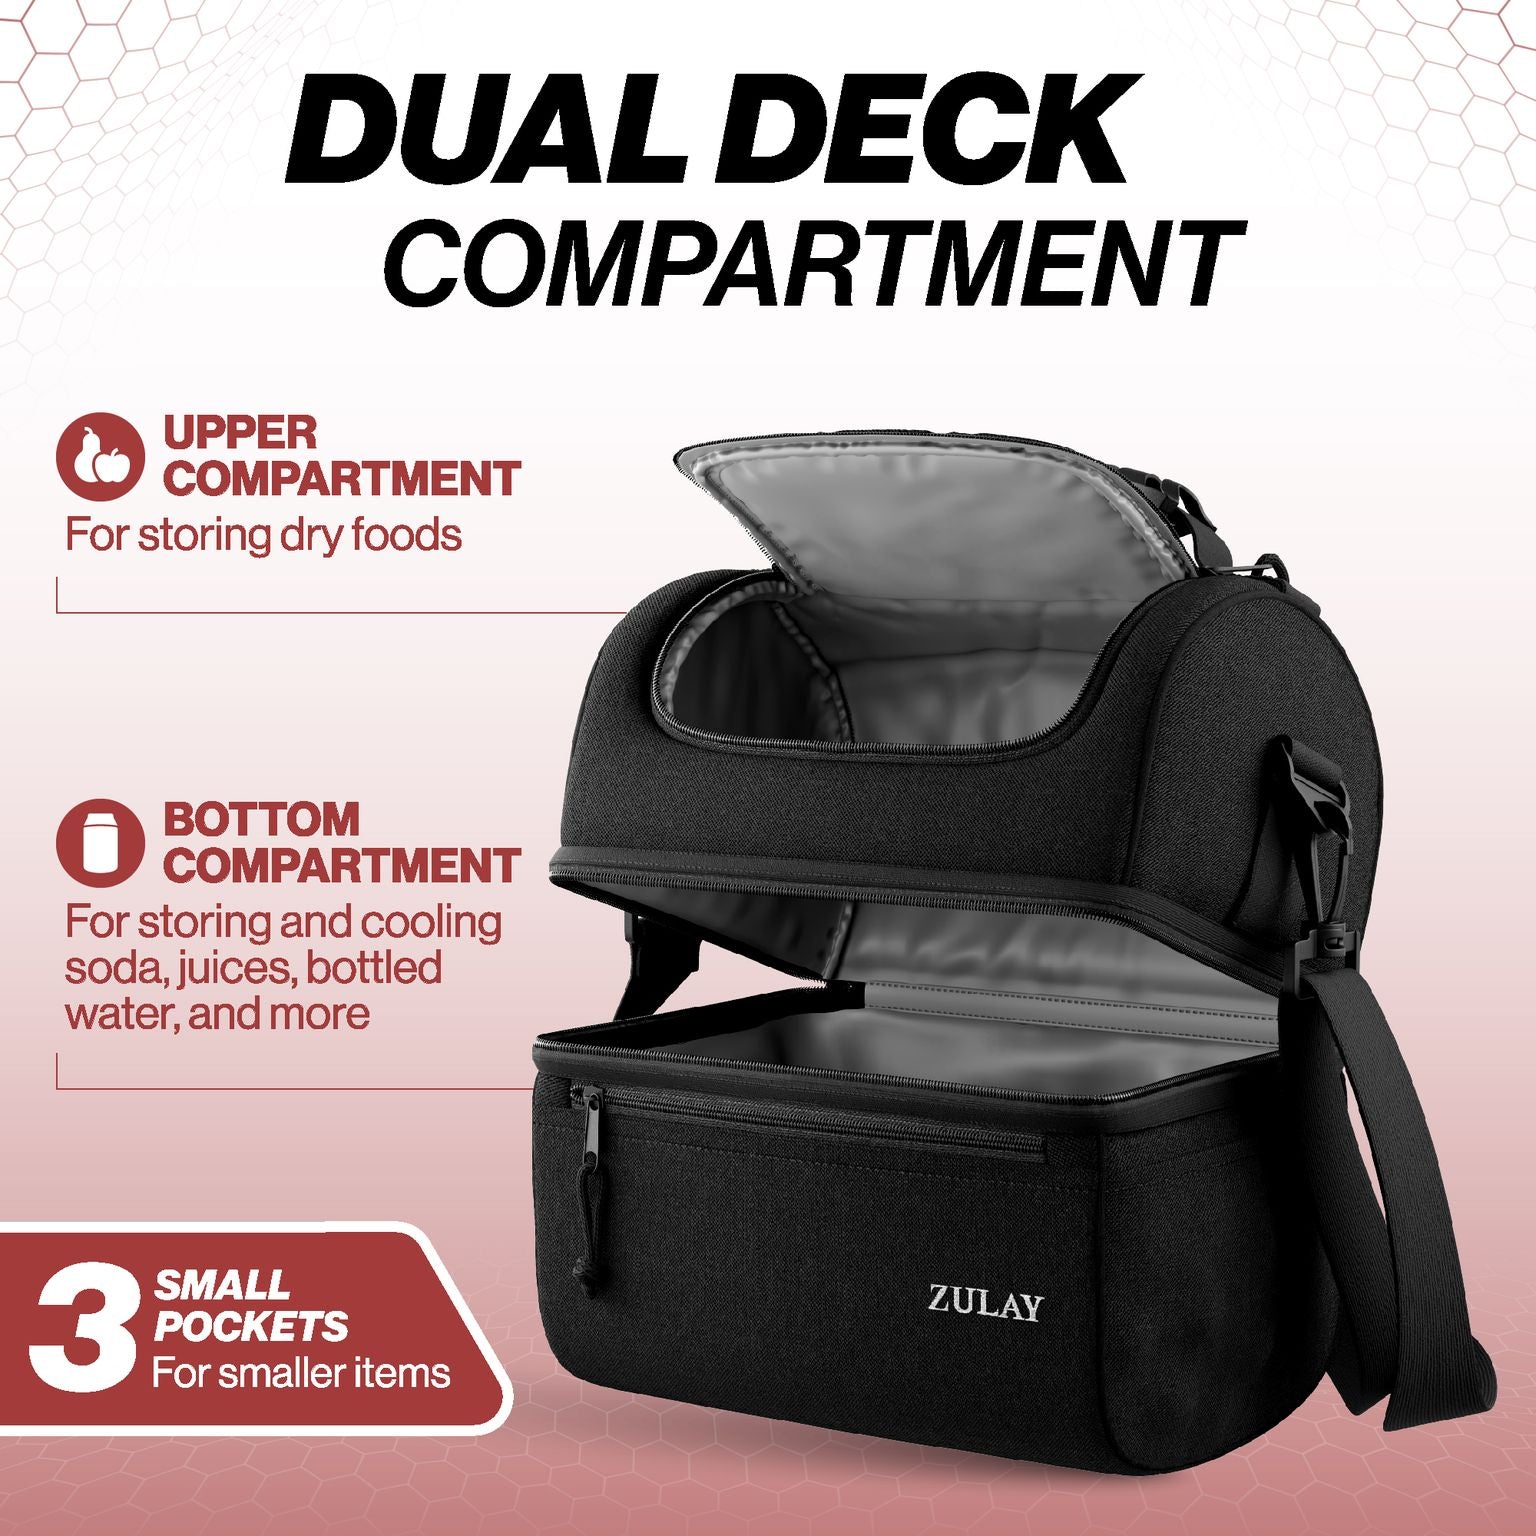 Zulay | Big 2-Compartment Online Kitchen With Insulated Strap - Save Box Today Lunch Bag